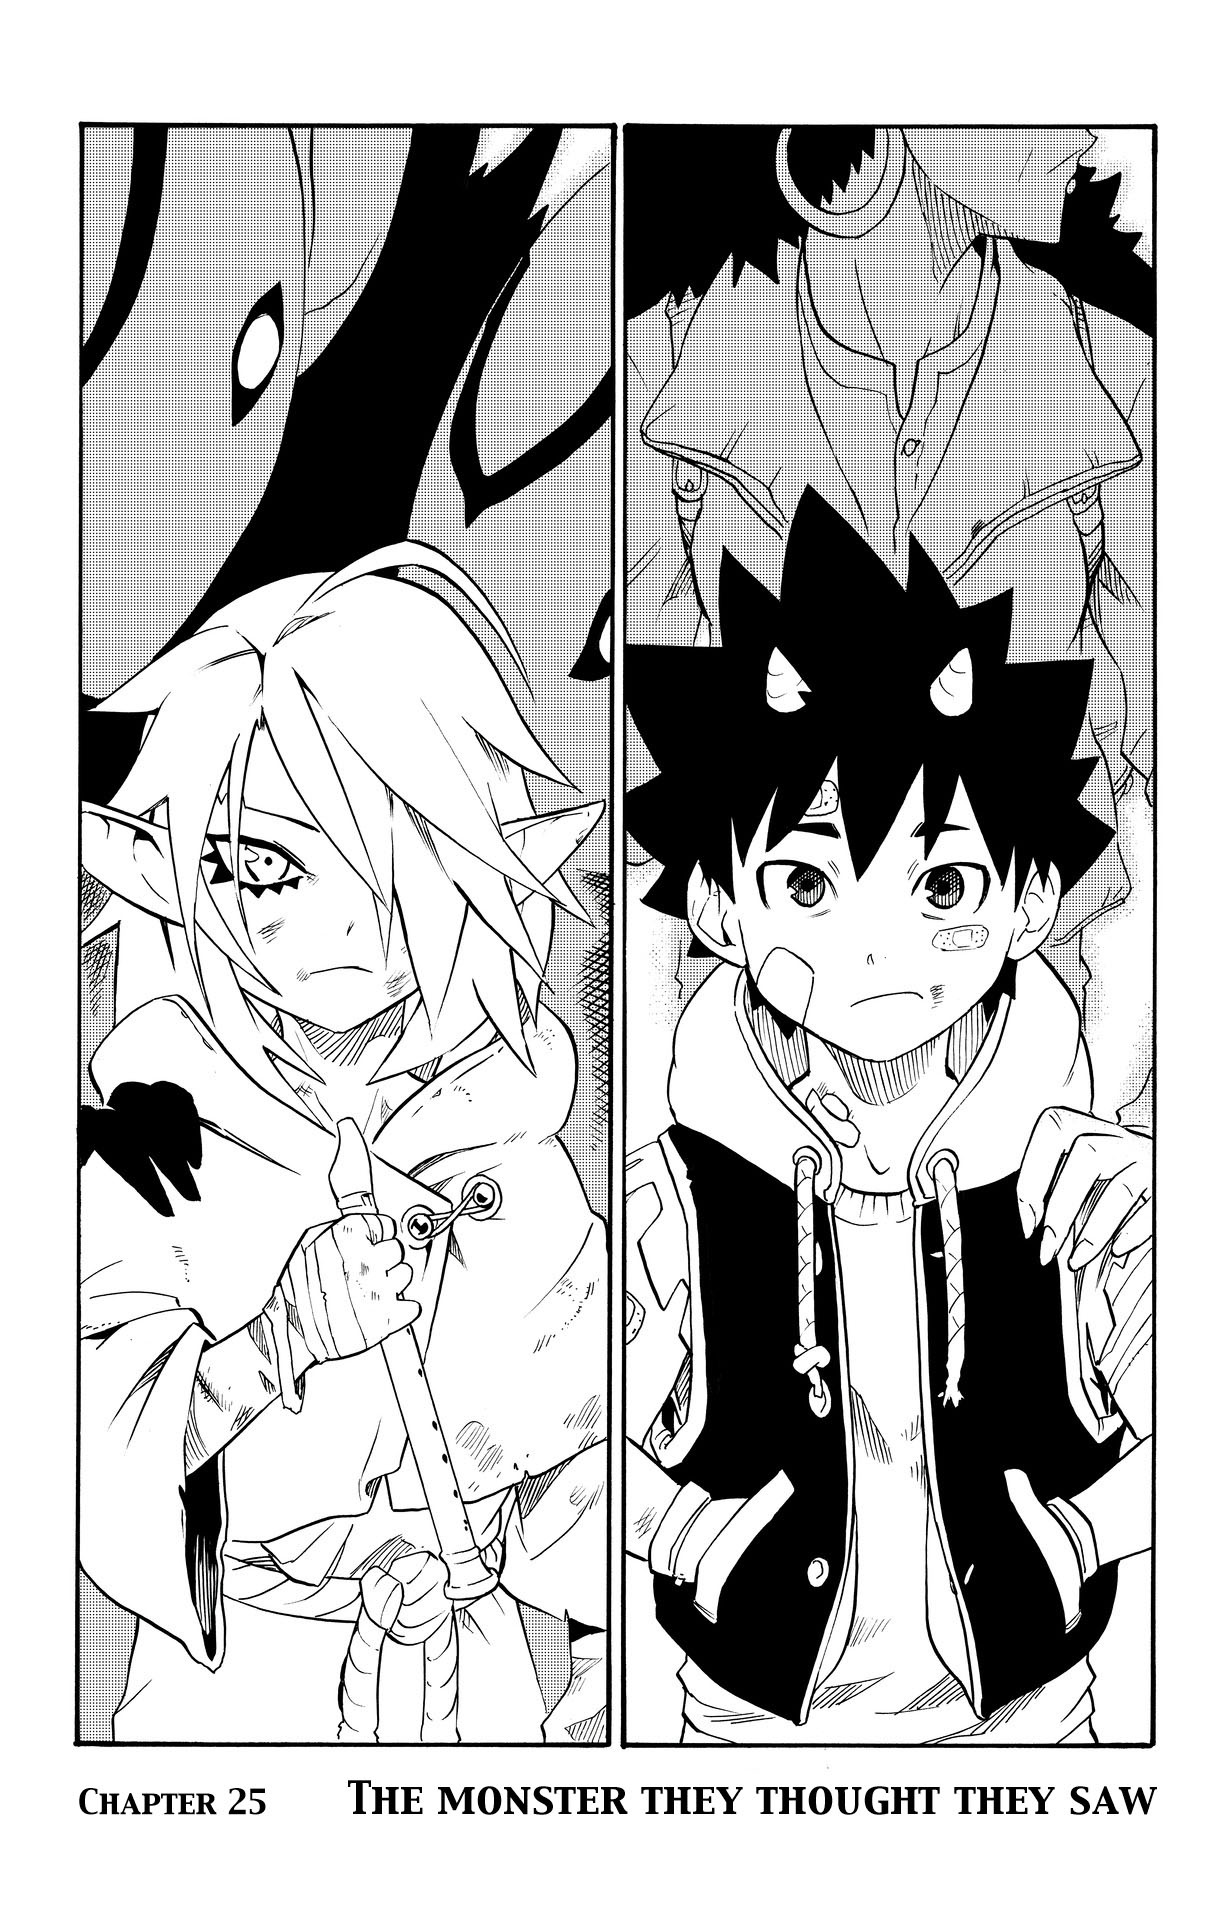 Radiant Vol. 4 Ch. 25 The Monster They Thought They Saw